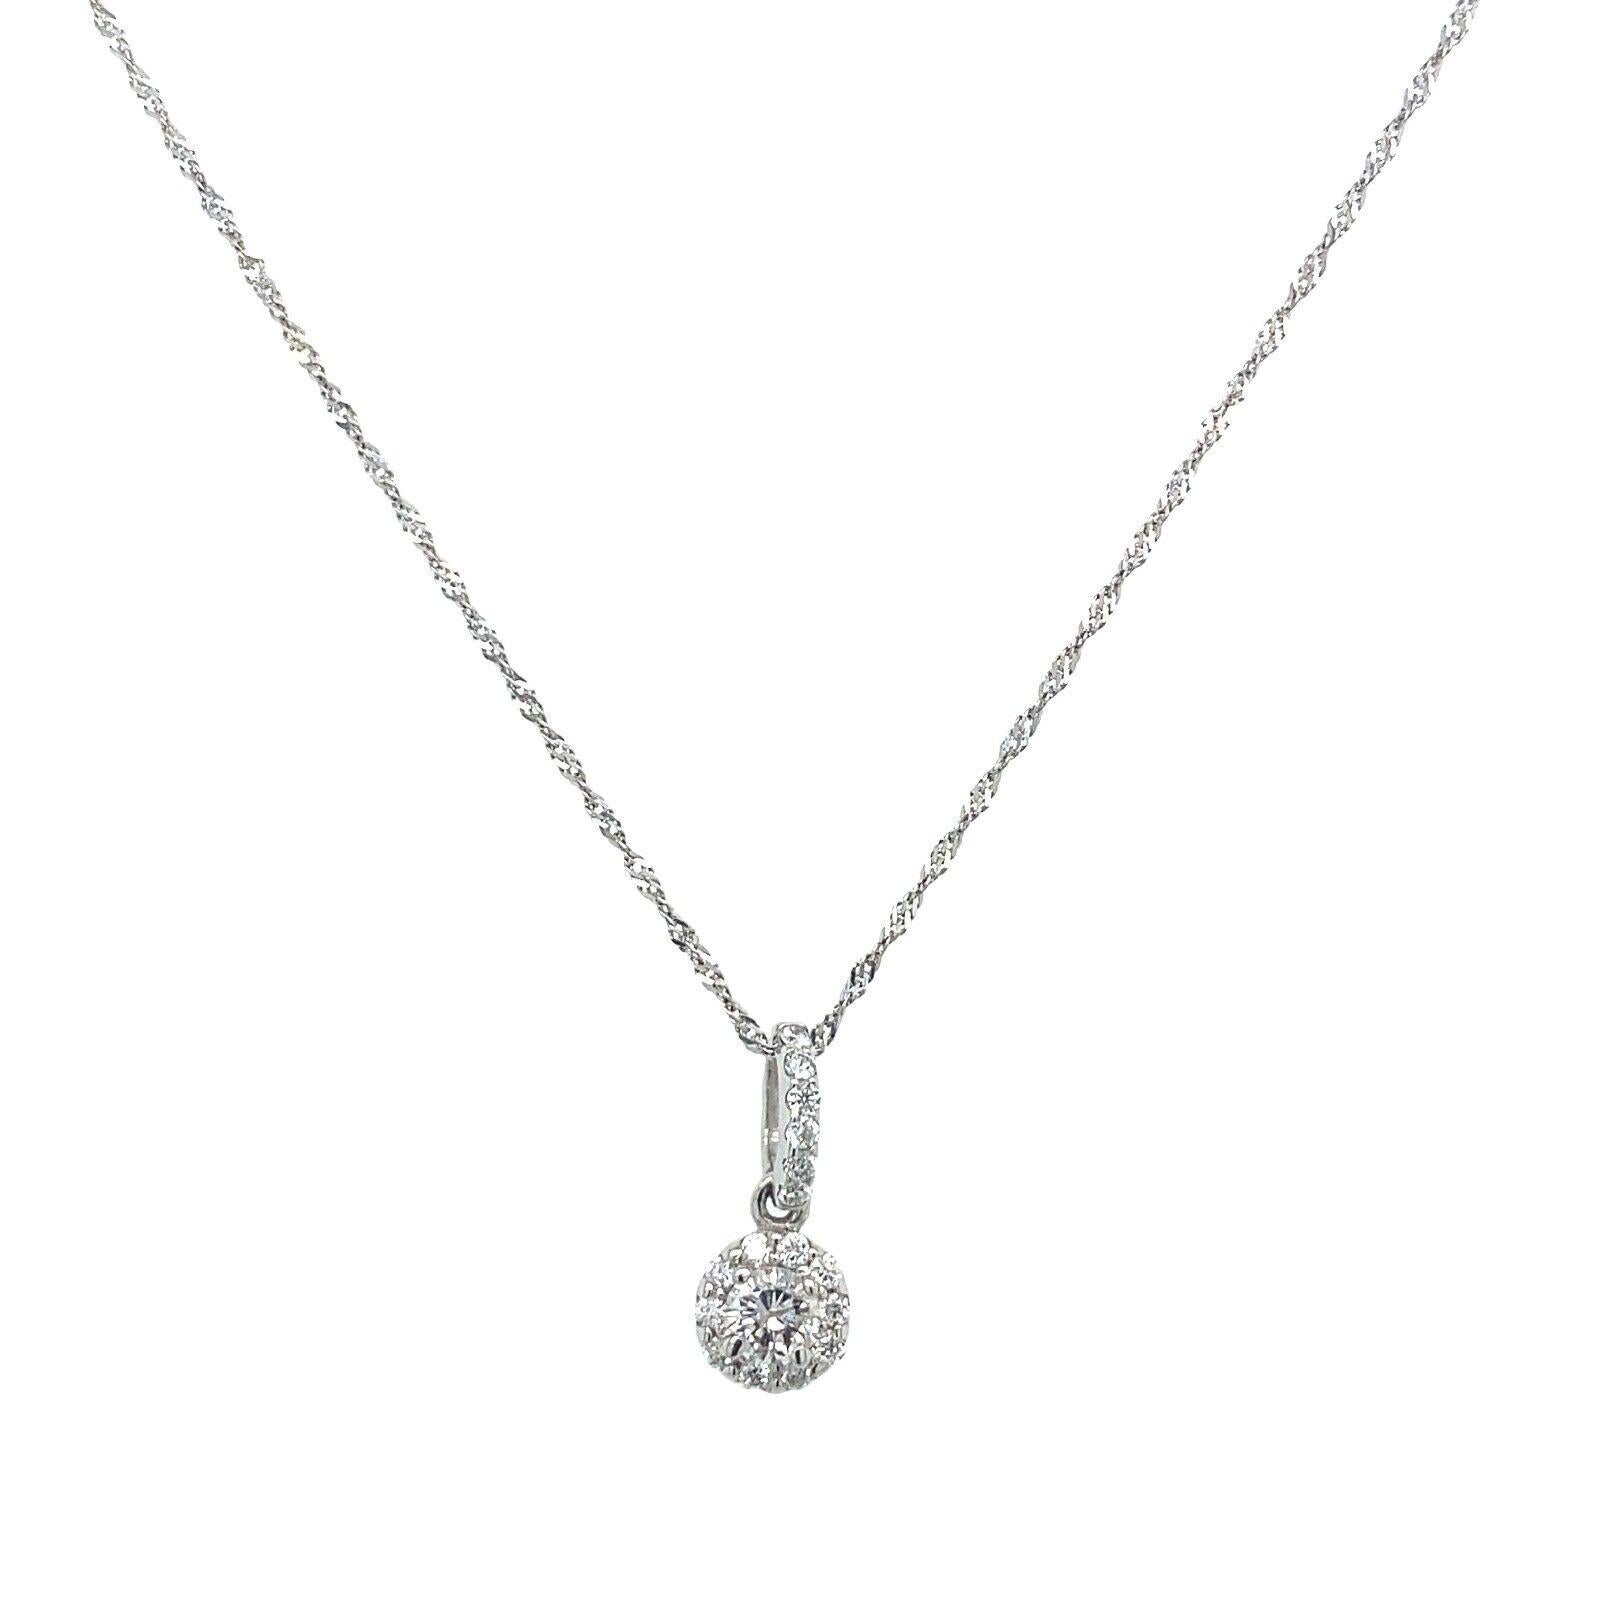 This necklace set features 0.30 natural Round Brilliant Cut Diamonds in a halo setting. The Diamonds are set in 18ct White Gold, and total length of the necklace is 18 inches. It is perfect for any occasion and is a great gift for a loved